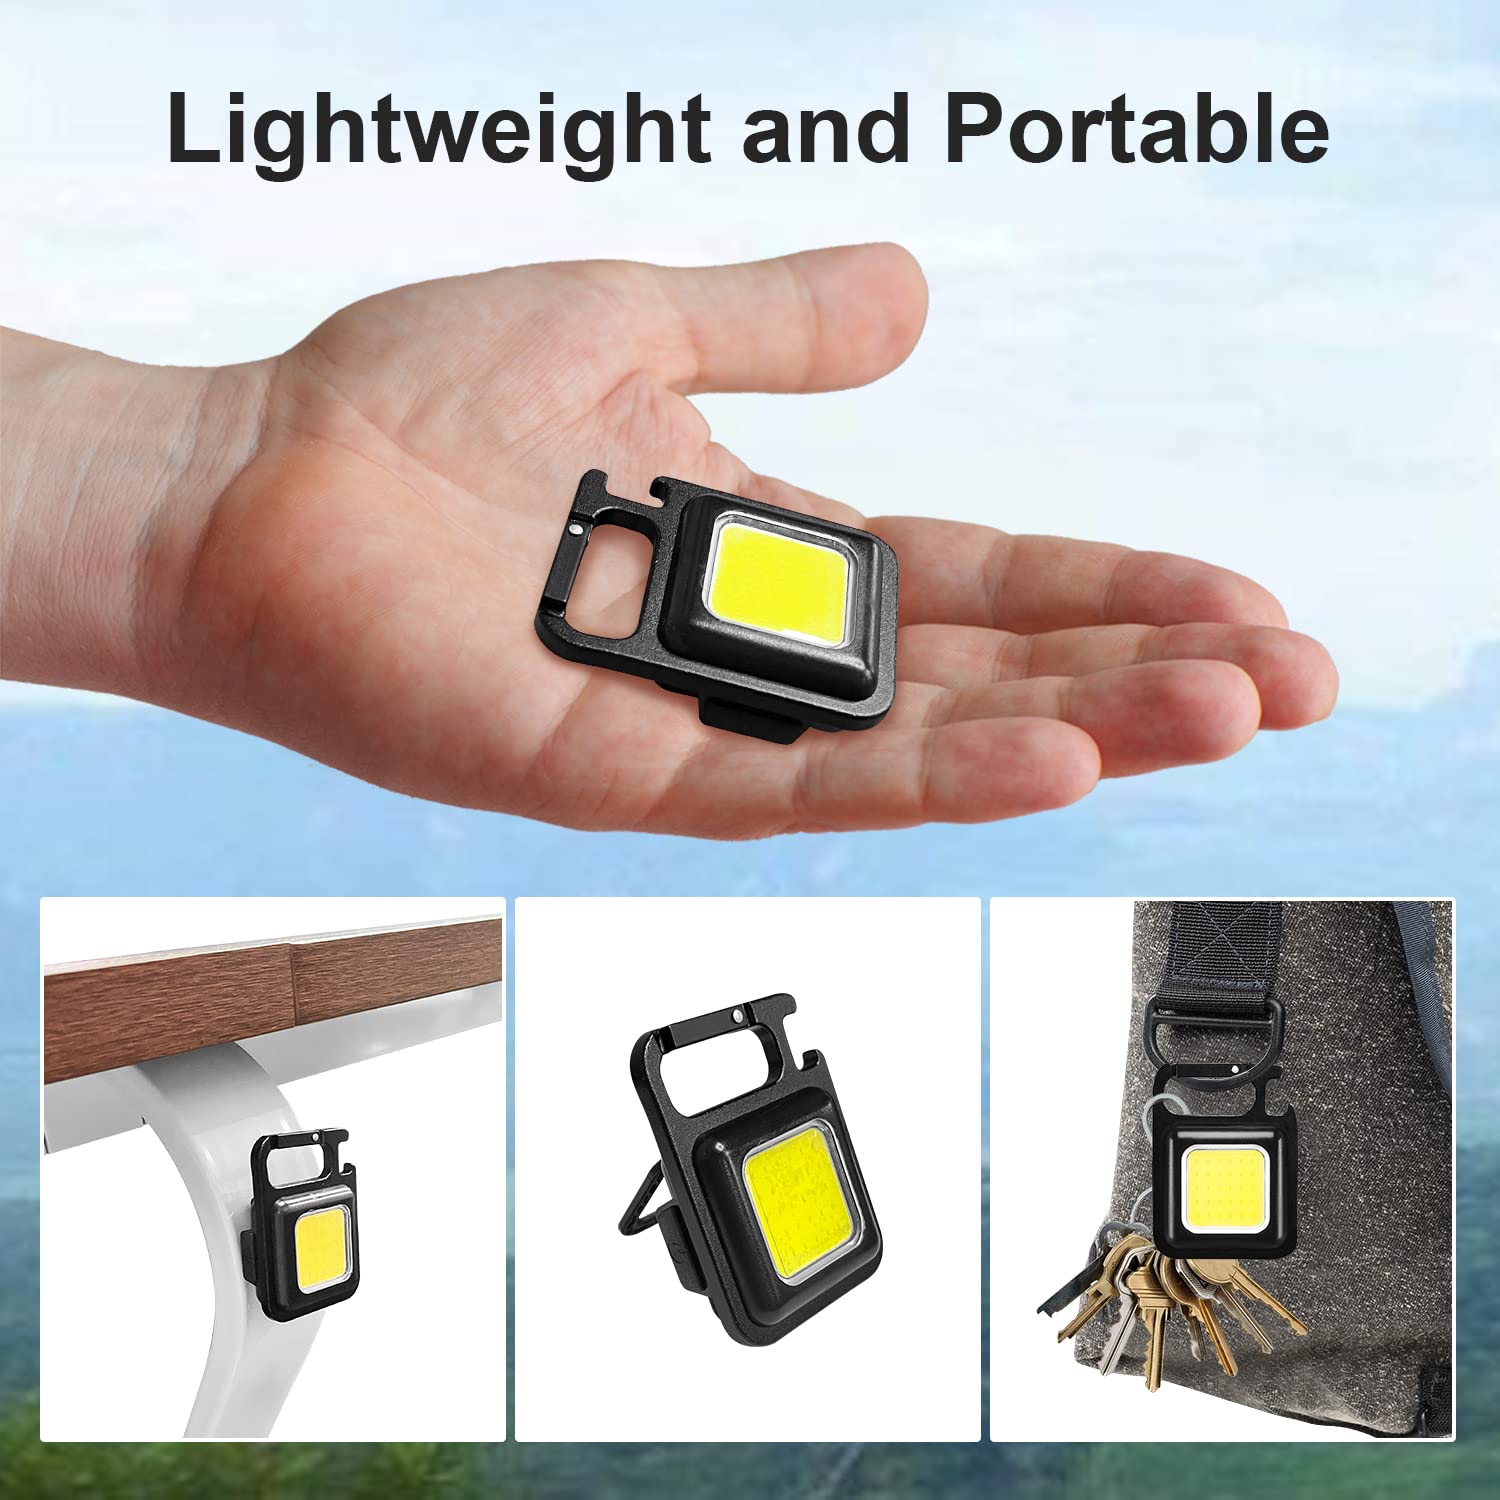 Rechargeable Keychain Mini Flashlight with 4 Light Modes,Ultralight Portable Pocket Light with Folding Bracket Bottle Opener and Magnet Base for Camping Walking